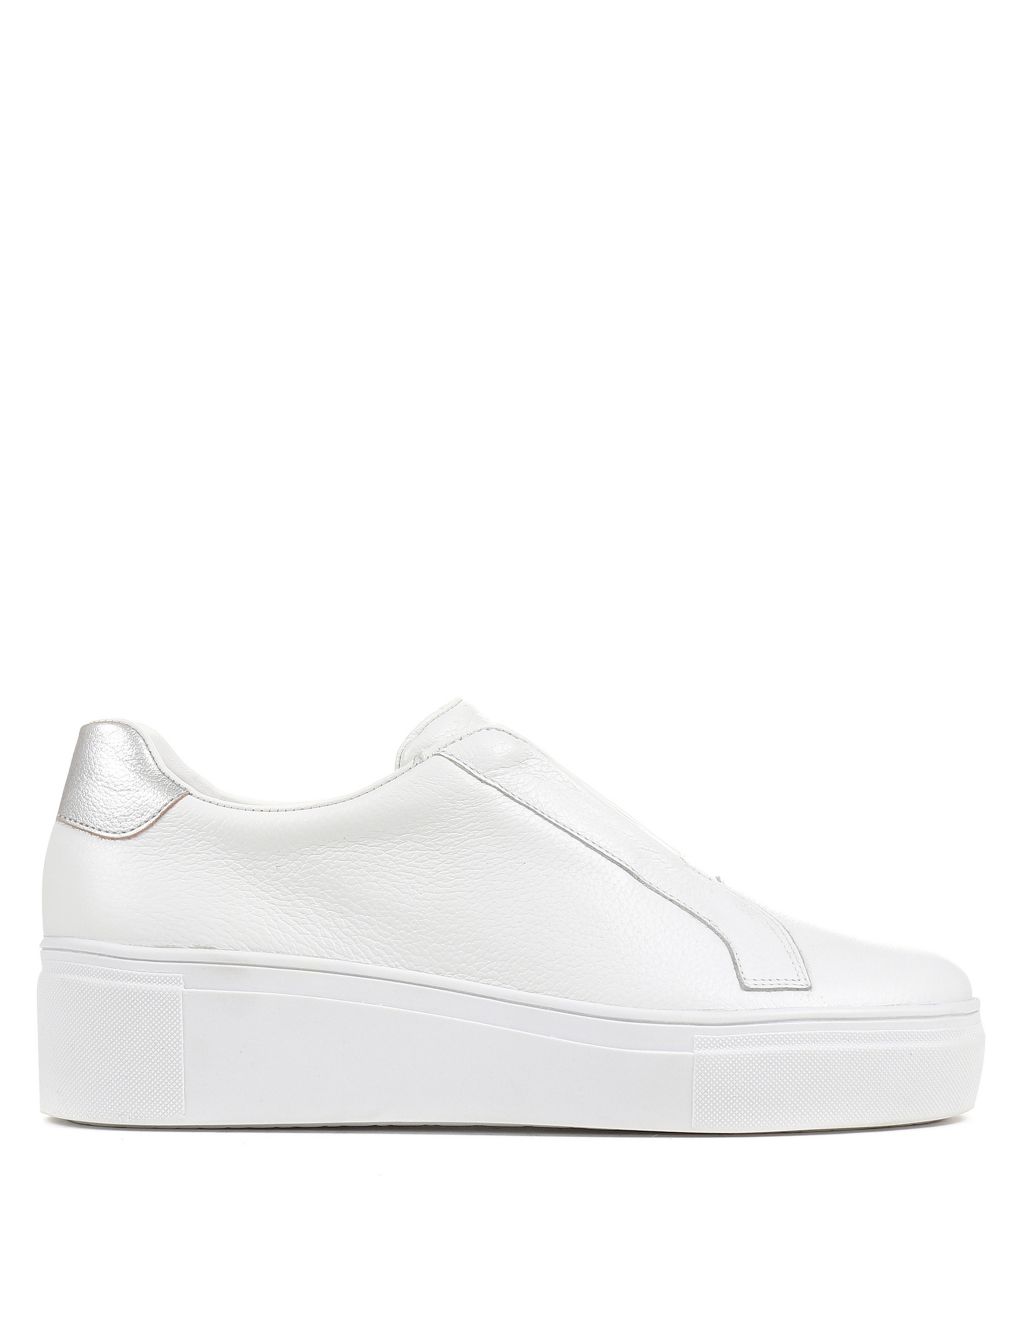 Leather Slip On Trainers image 4